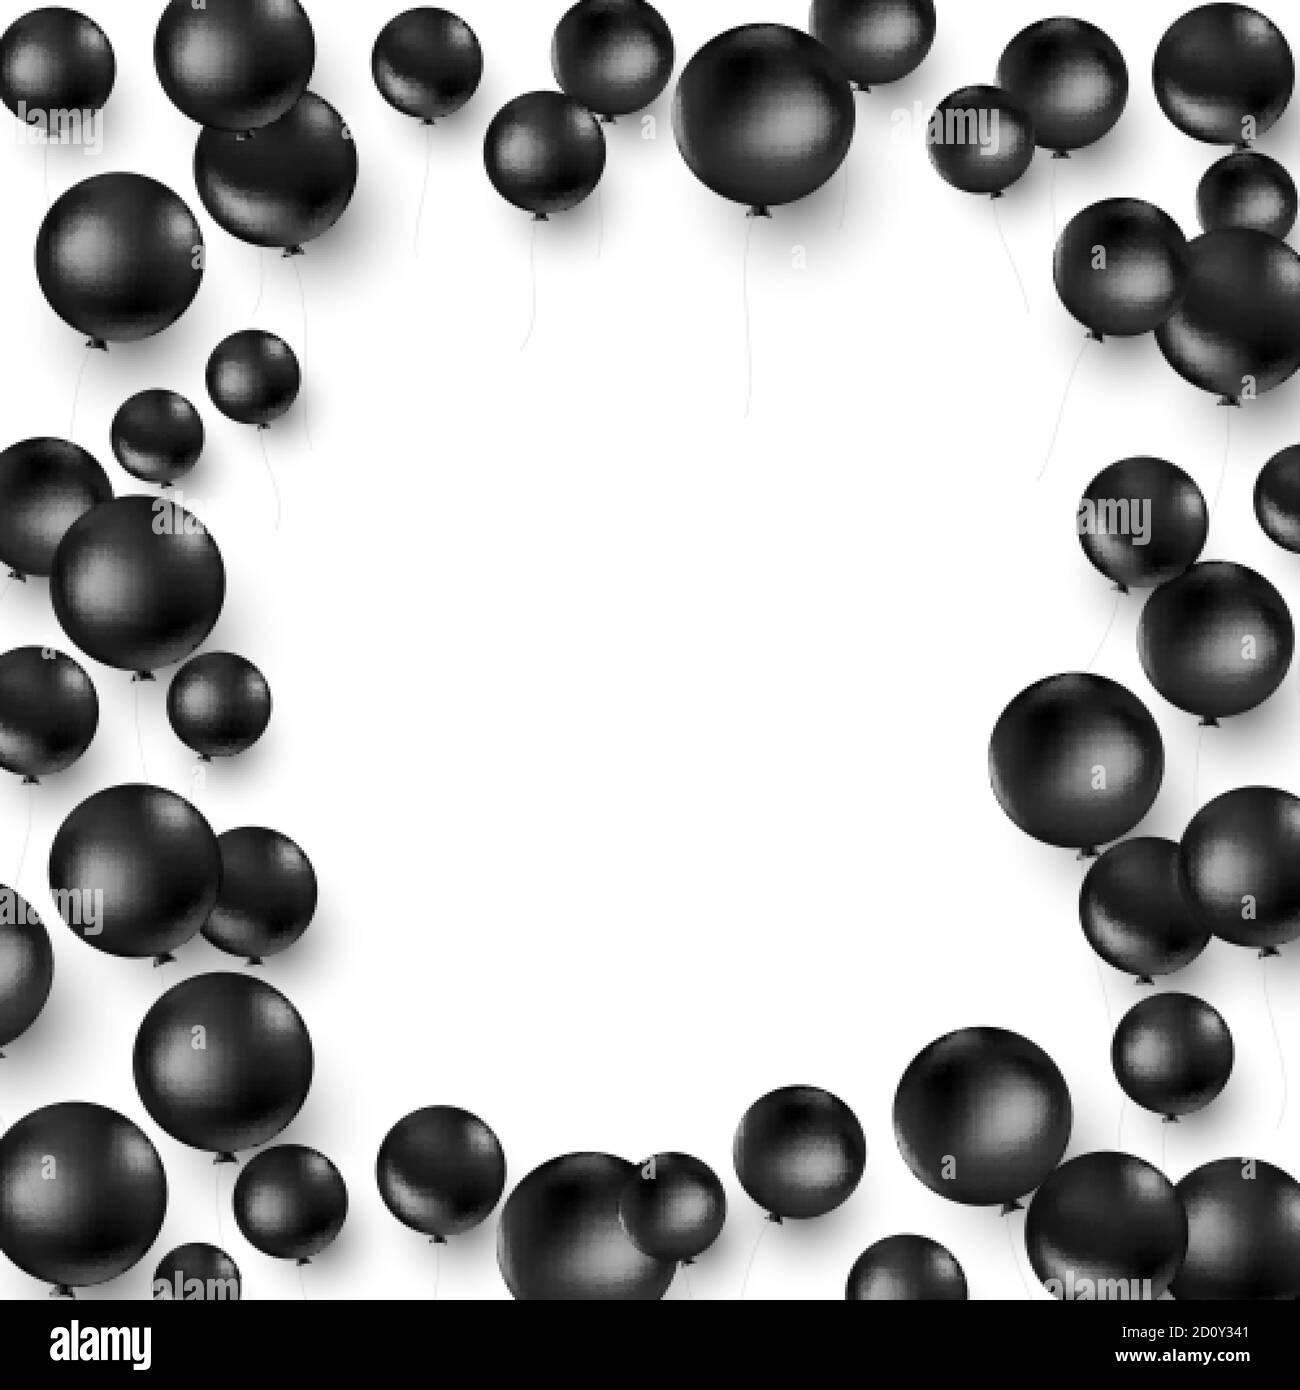 Black balloons background. Design element for black friday poster and greeting card. Vector Stock Vector